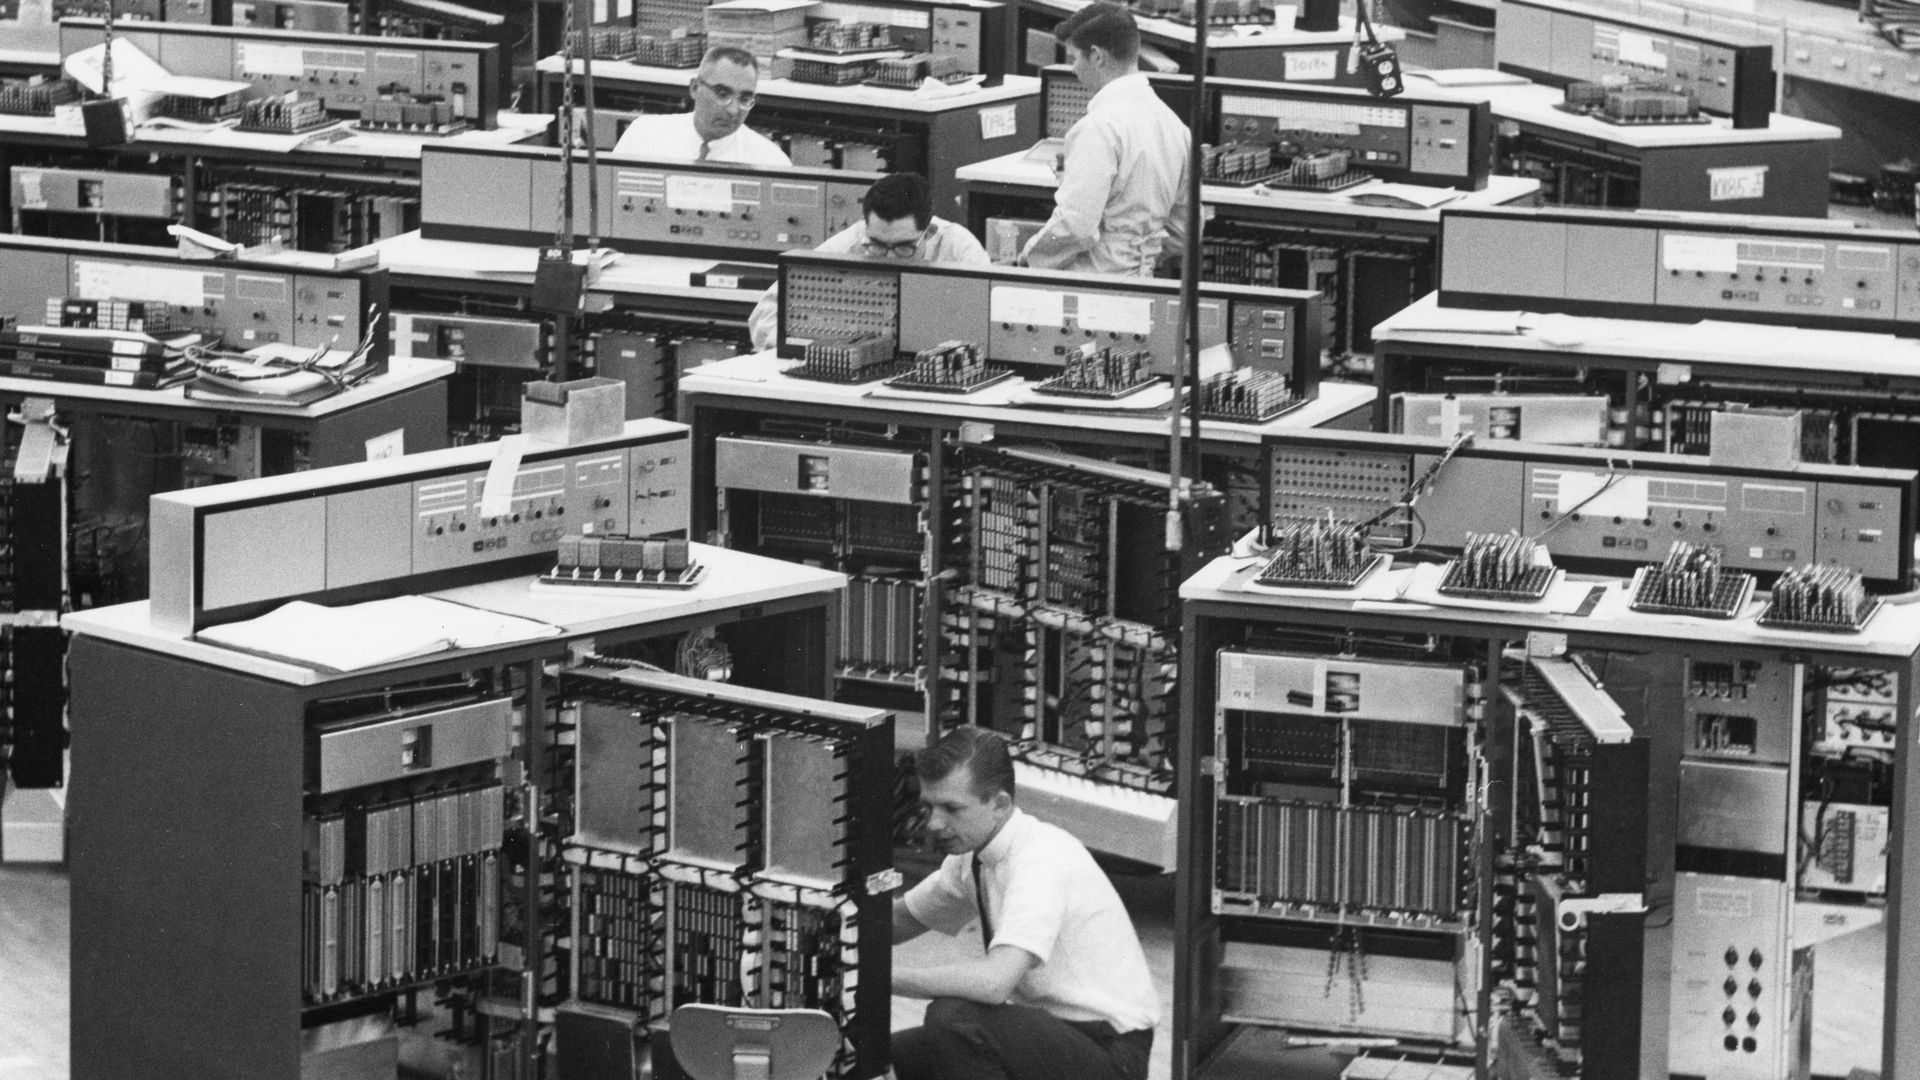 Black and white photo of giant IBM mainframe computers being inspected before shipping